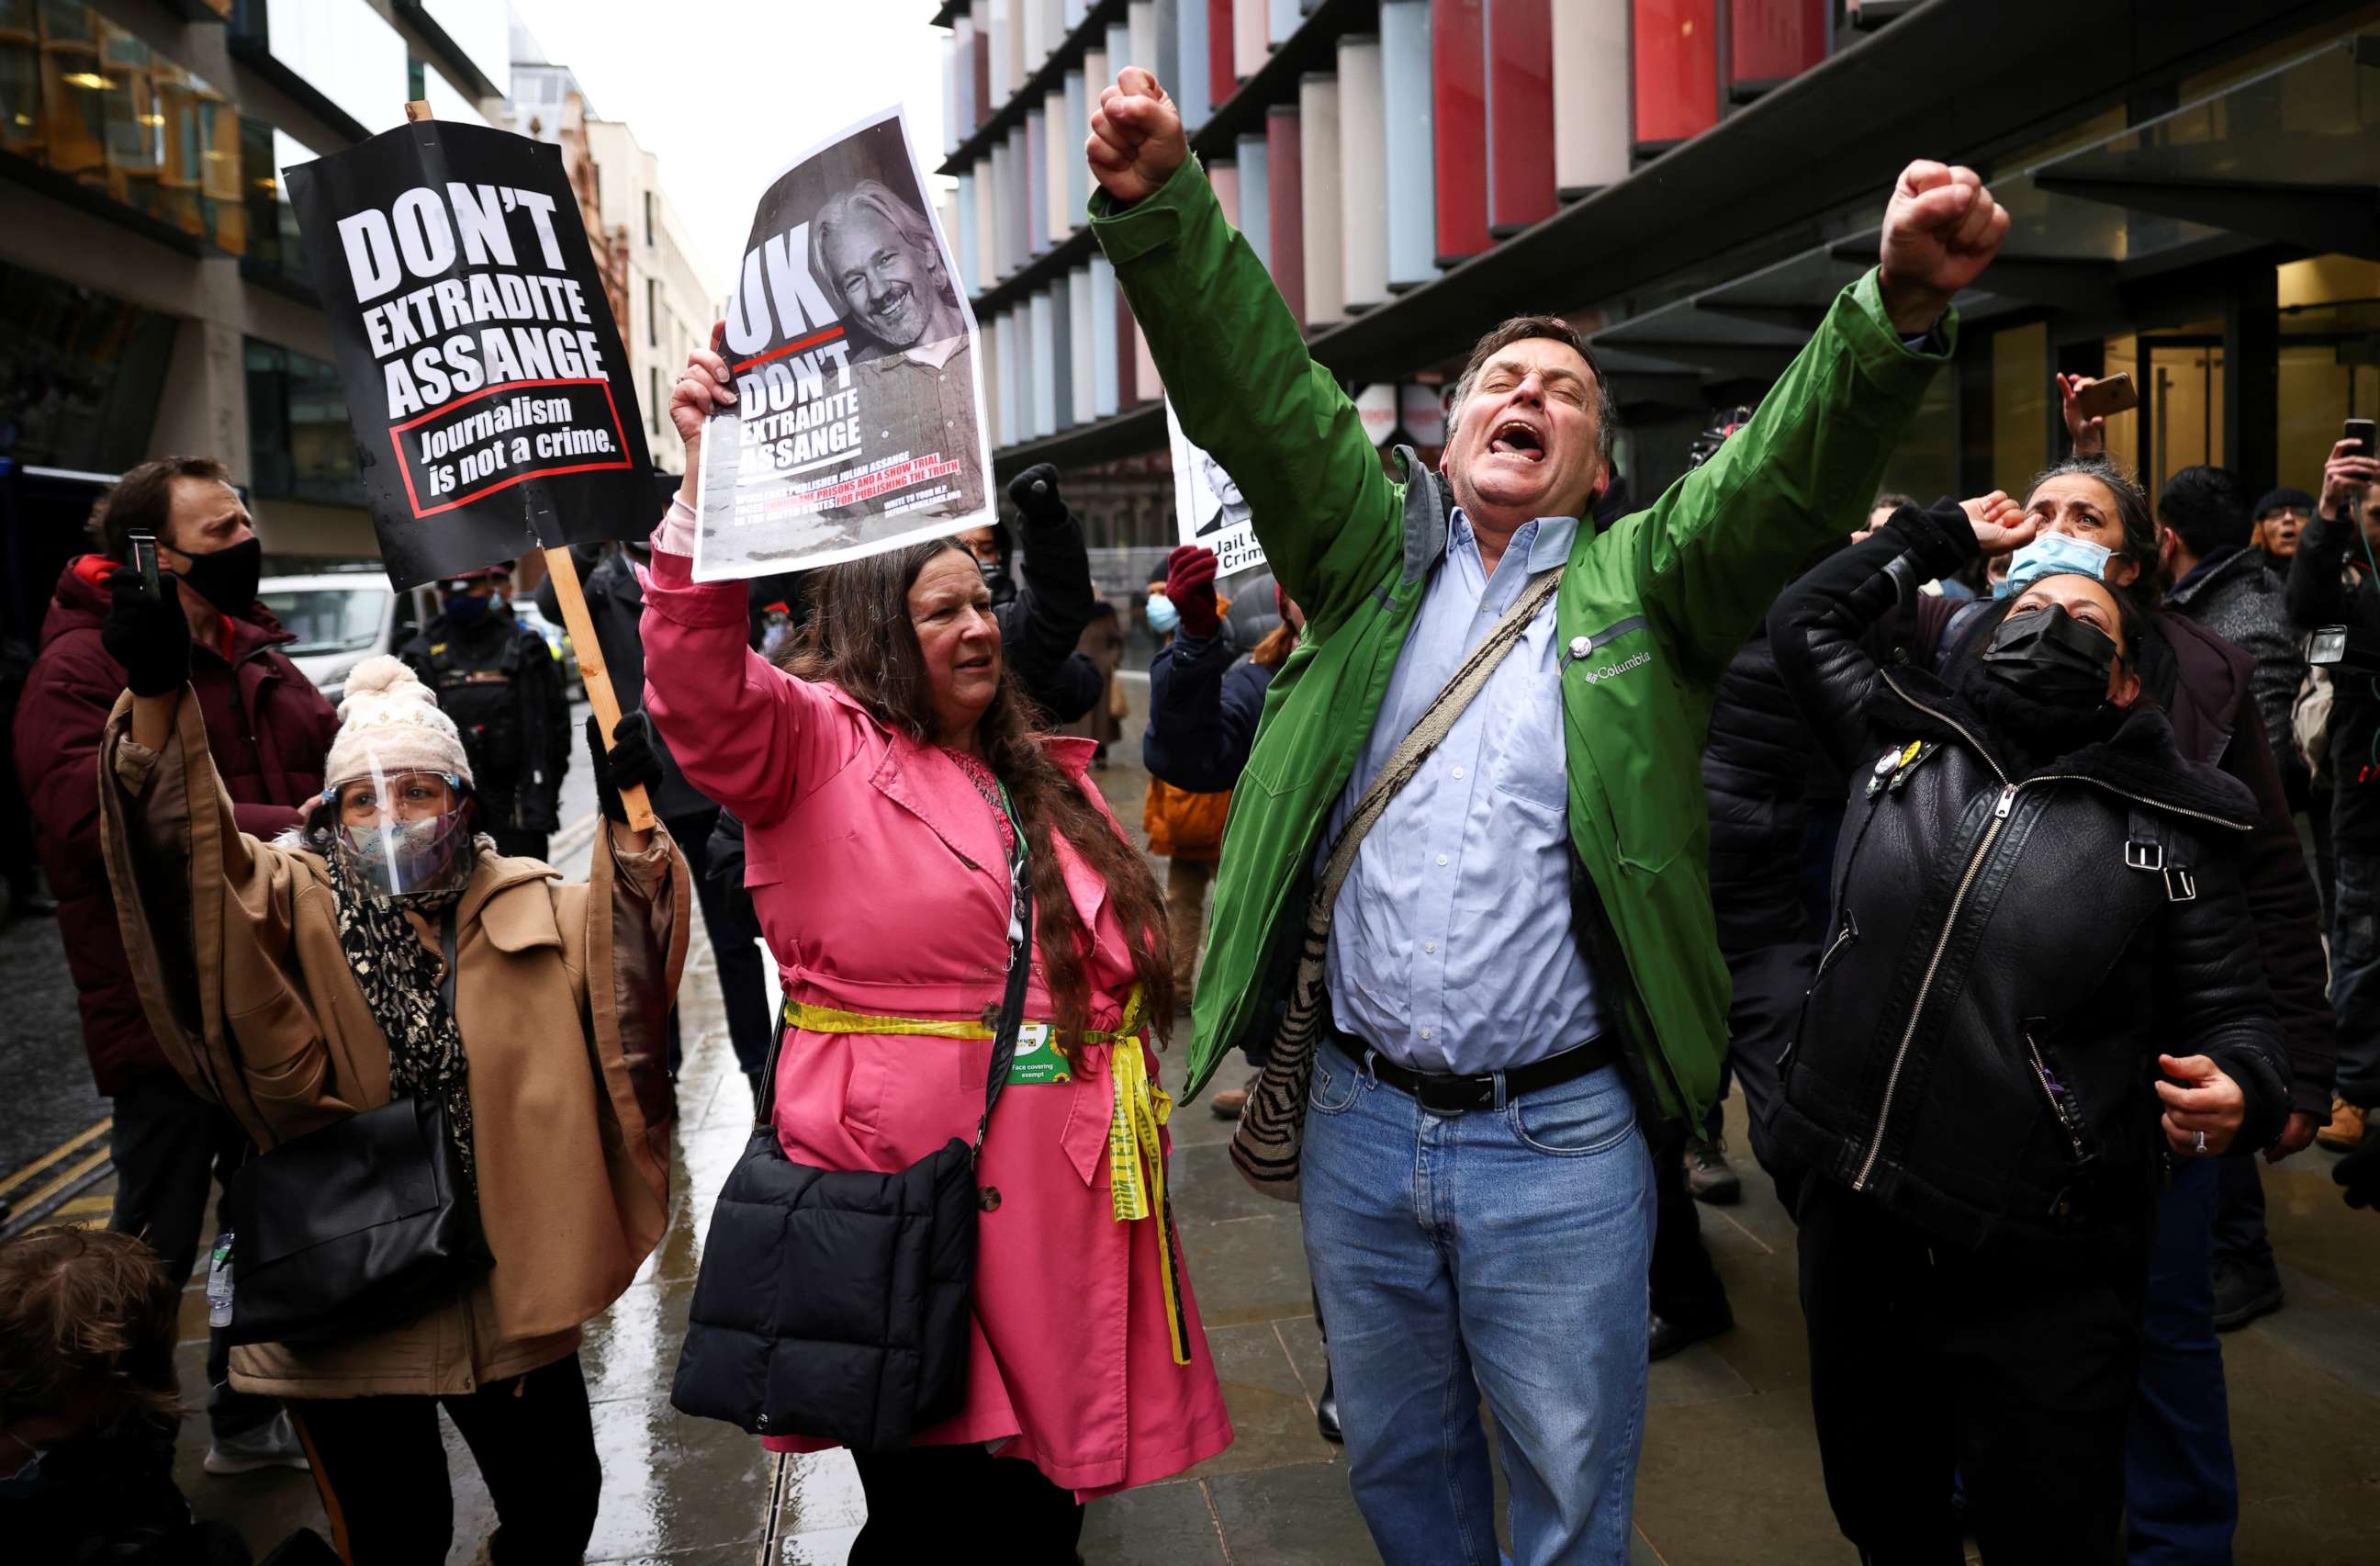 PHOTO: People celebrate the Central Criminal Court in London after a judge ruled that WikiLeaks founder Julian Assange should not be extradited to the United States, Jan. 4, 2021.